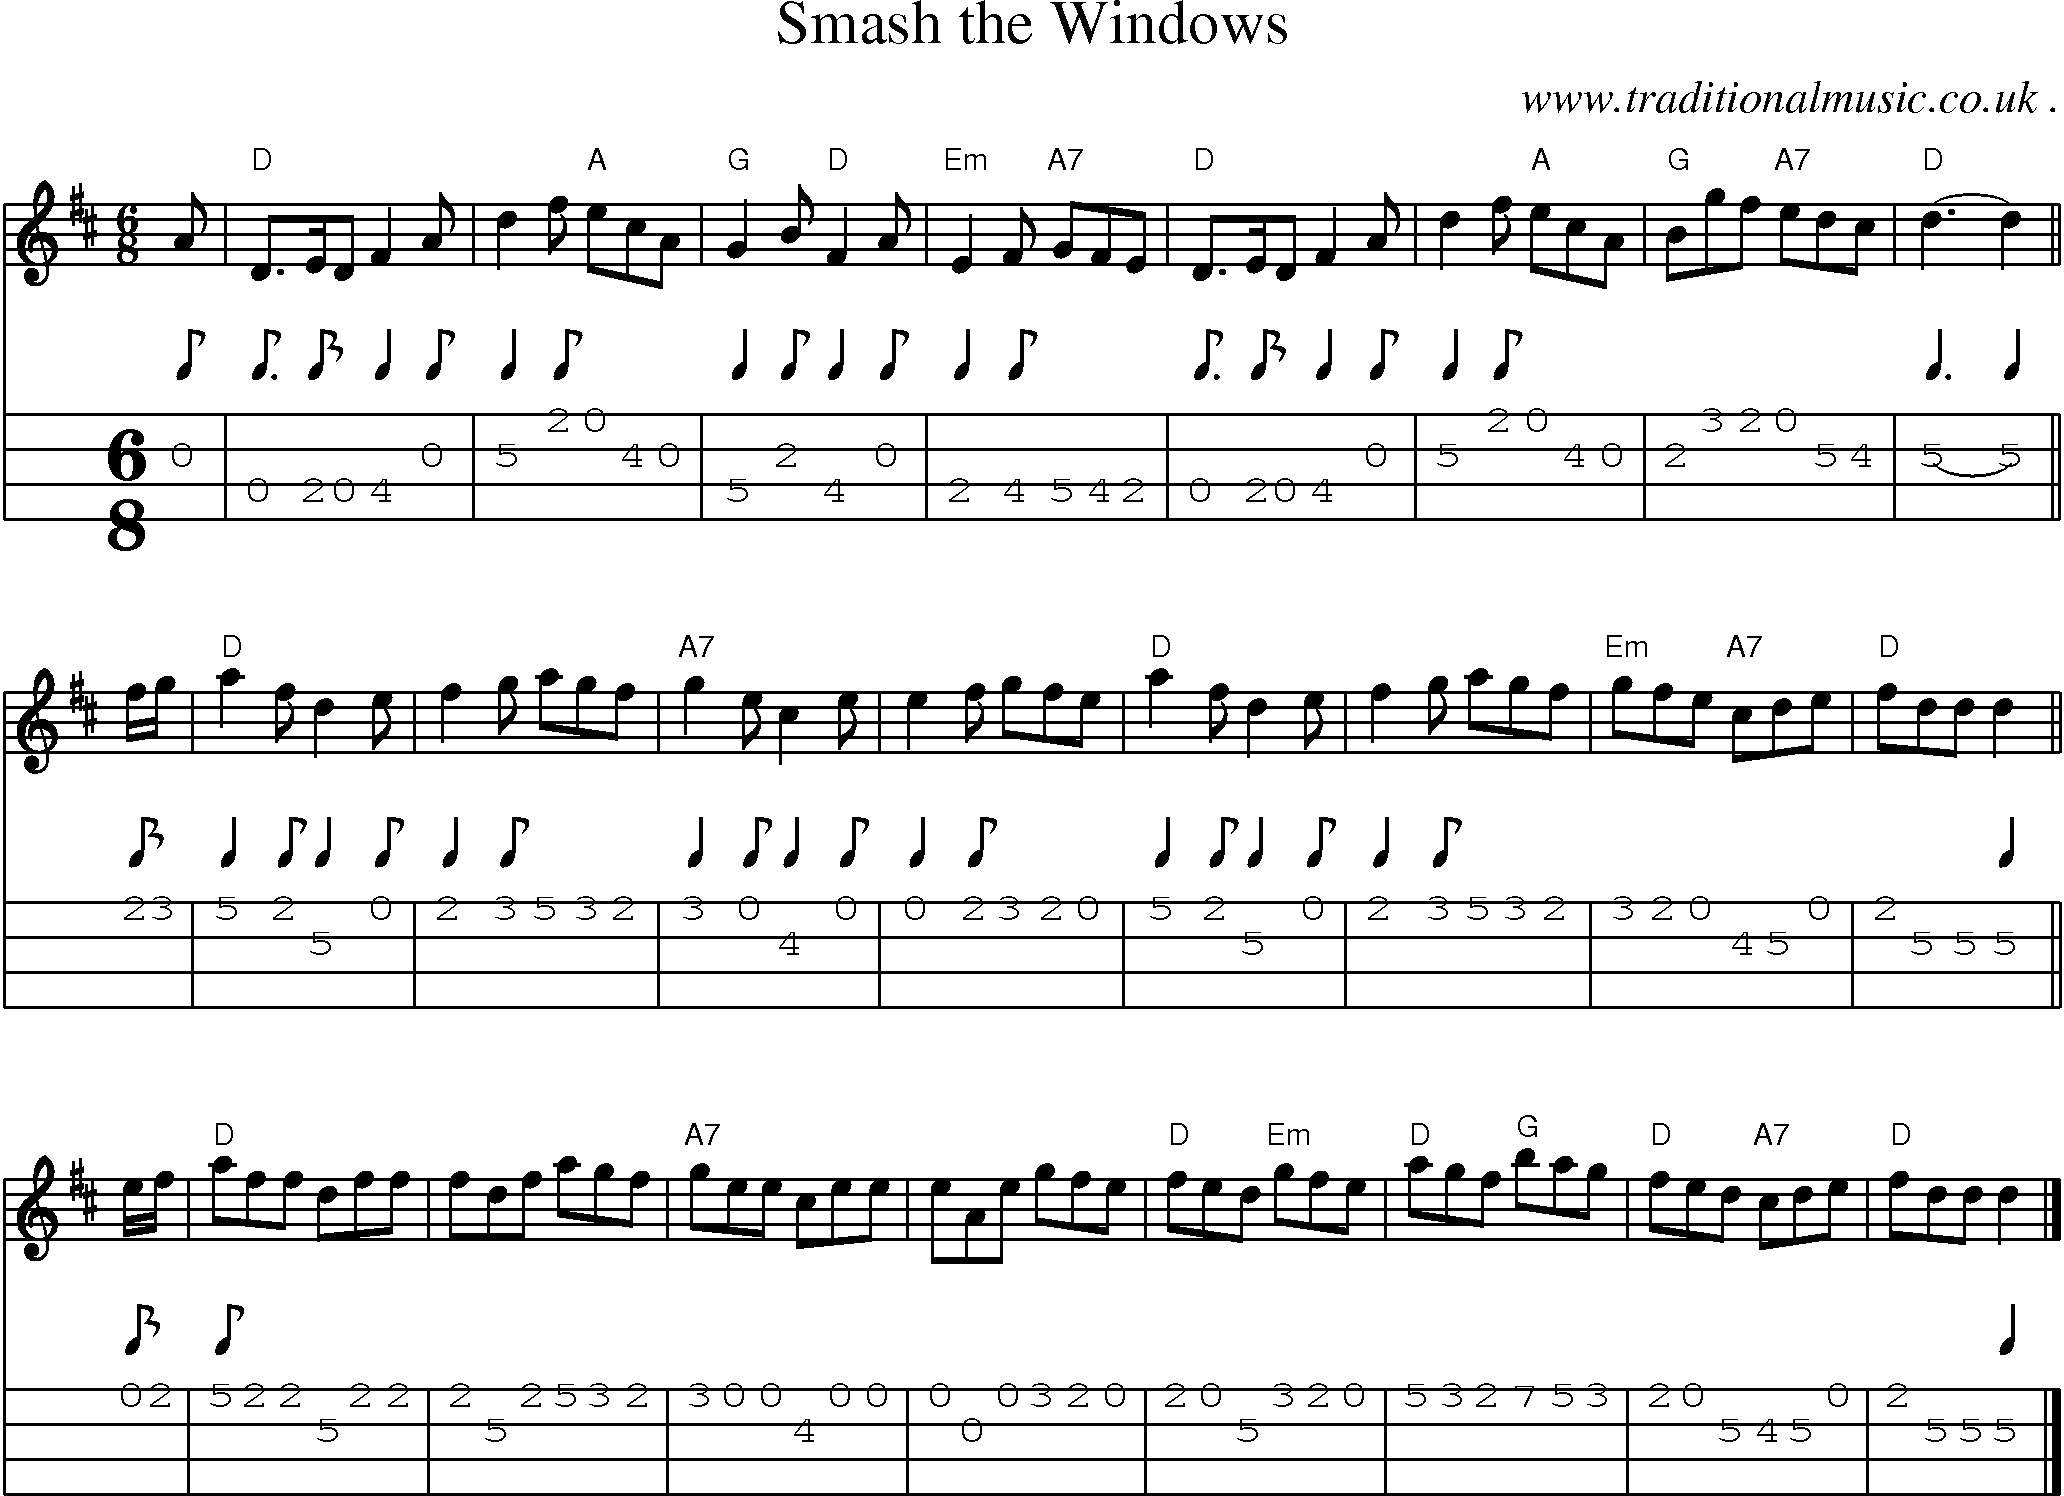 Sheet-music  score, Chords and Mandolin Tabs for Smash The Windows